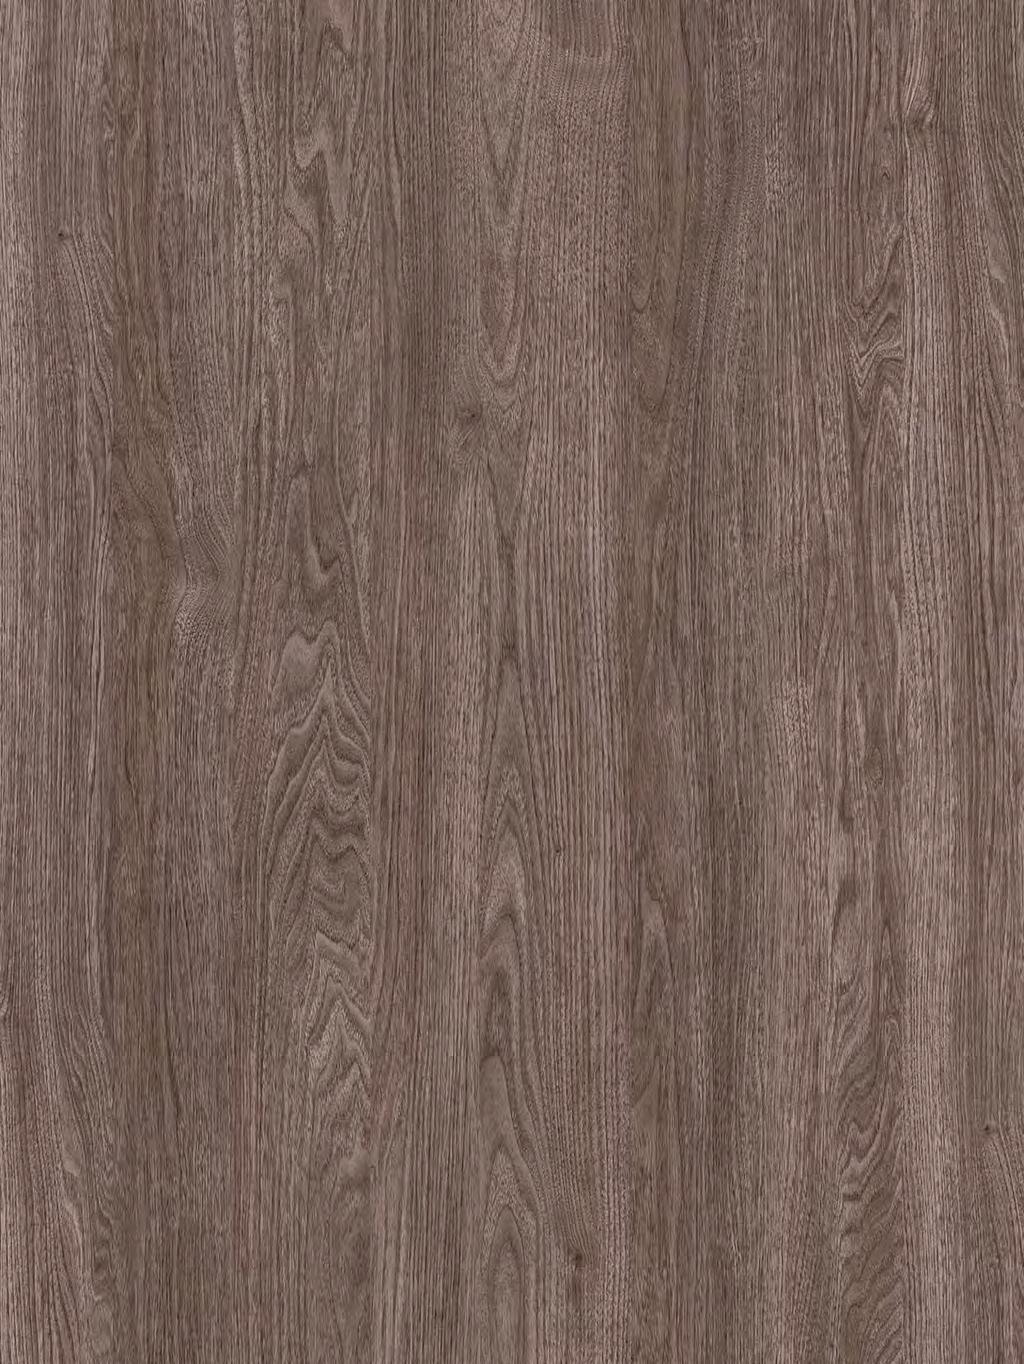 New! PEPPERWOOD 4x8 Engraved In Register (EIR) Where the texture